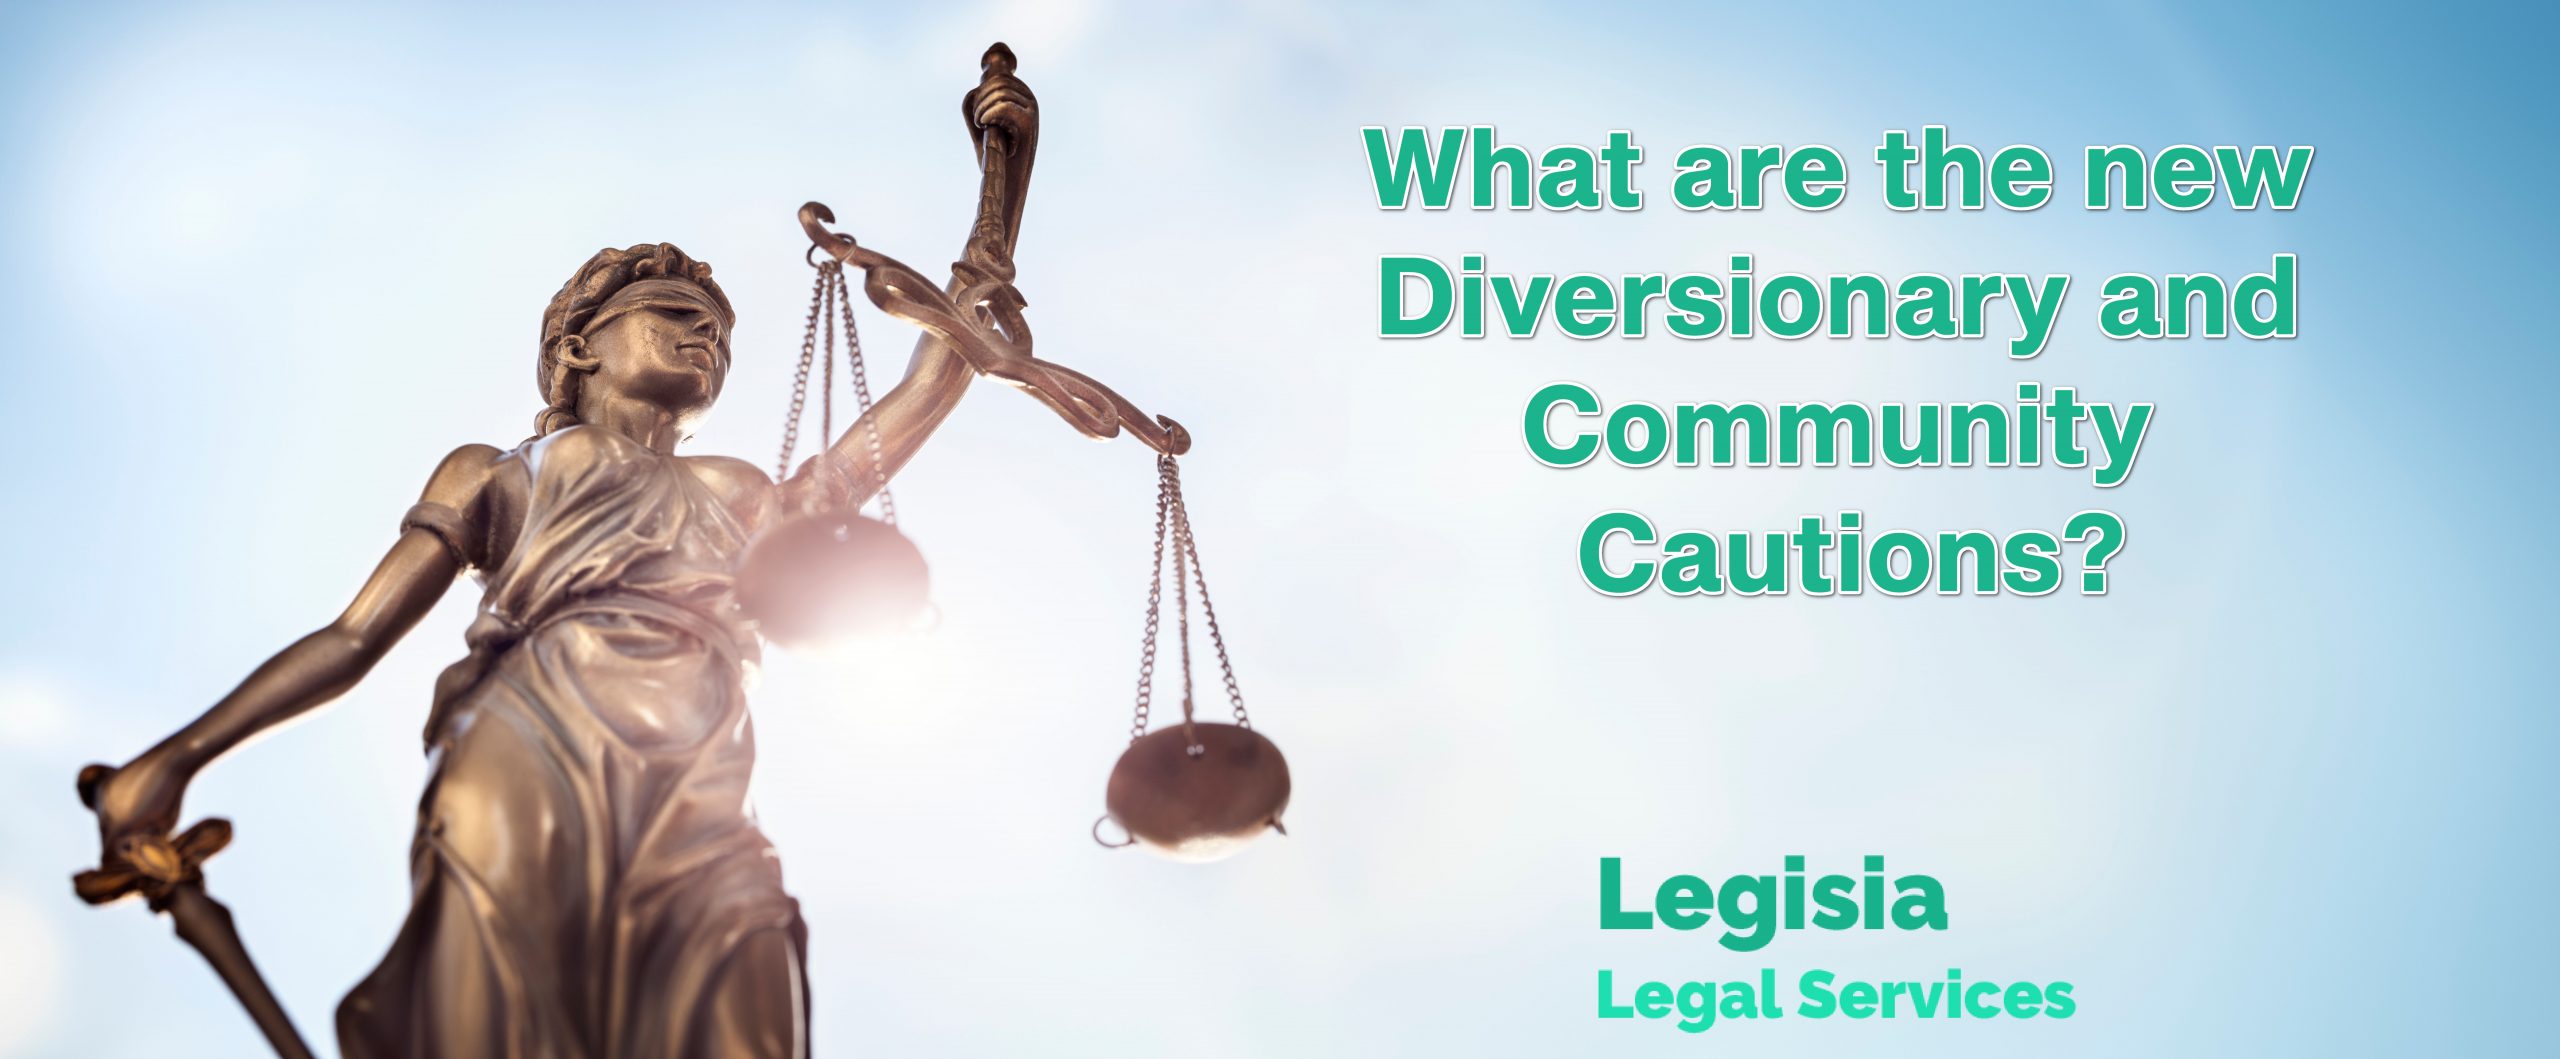 What are the new Diversionary and Community Cautions?